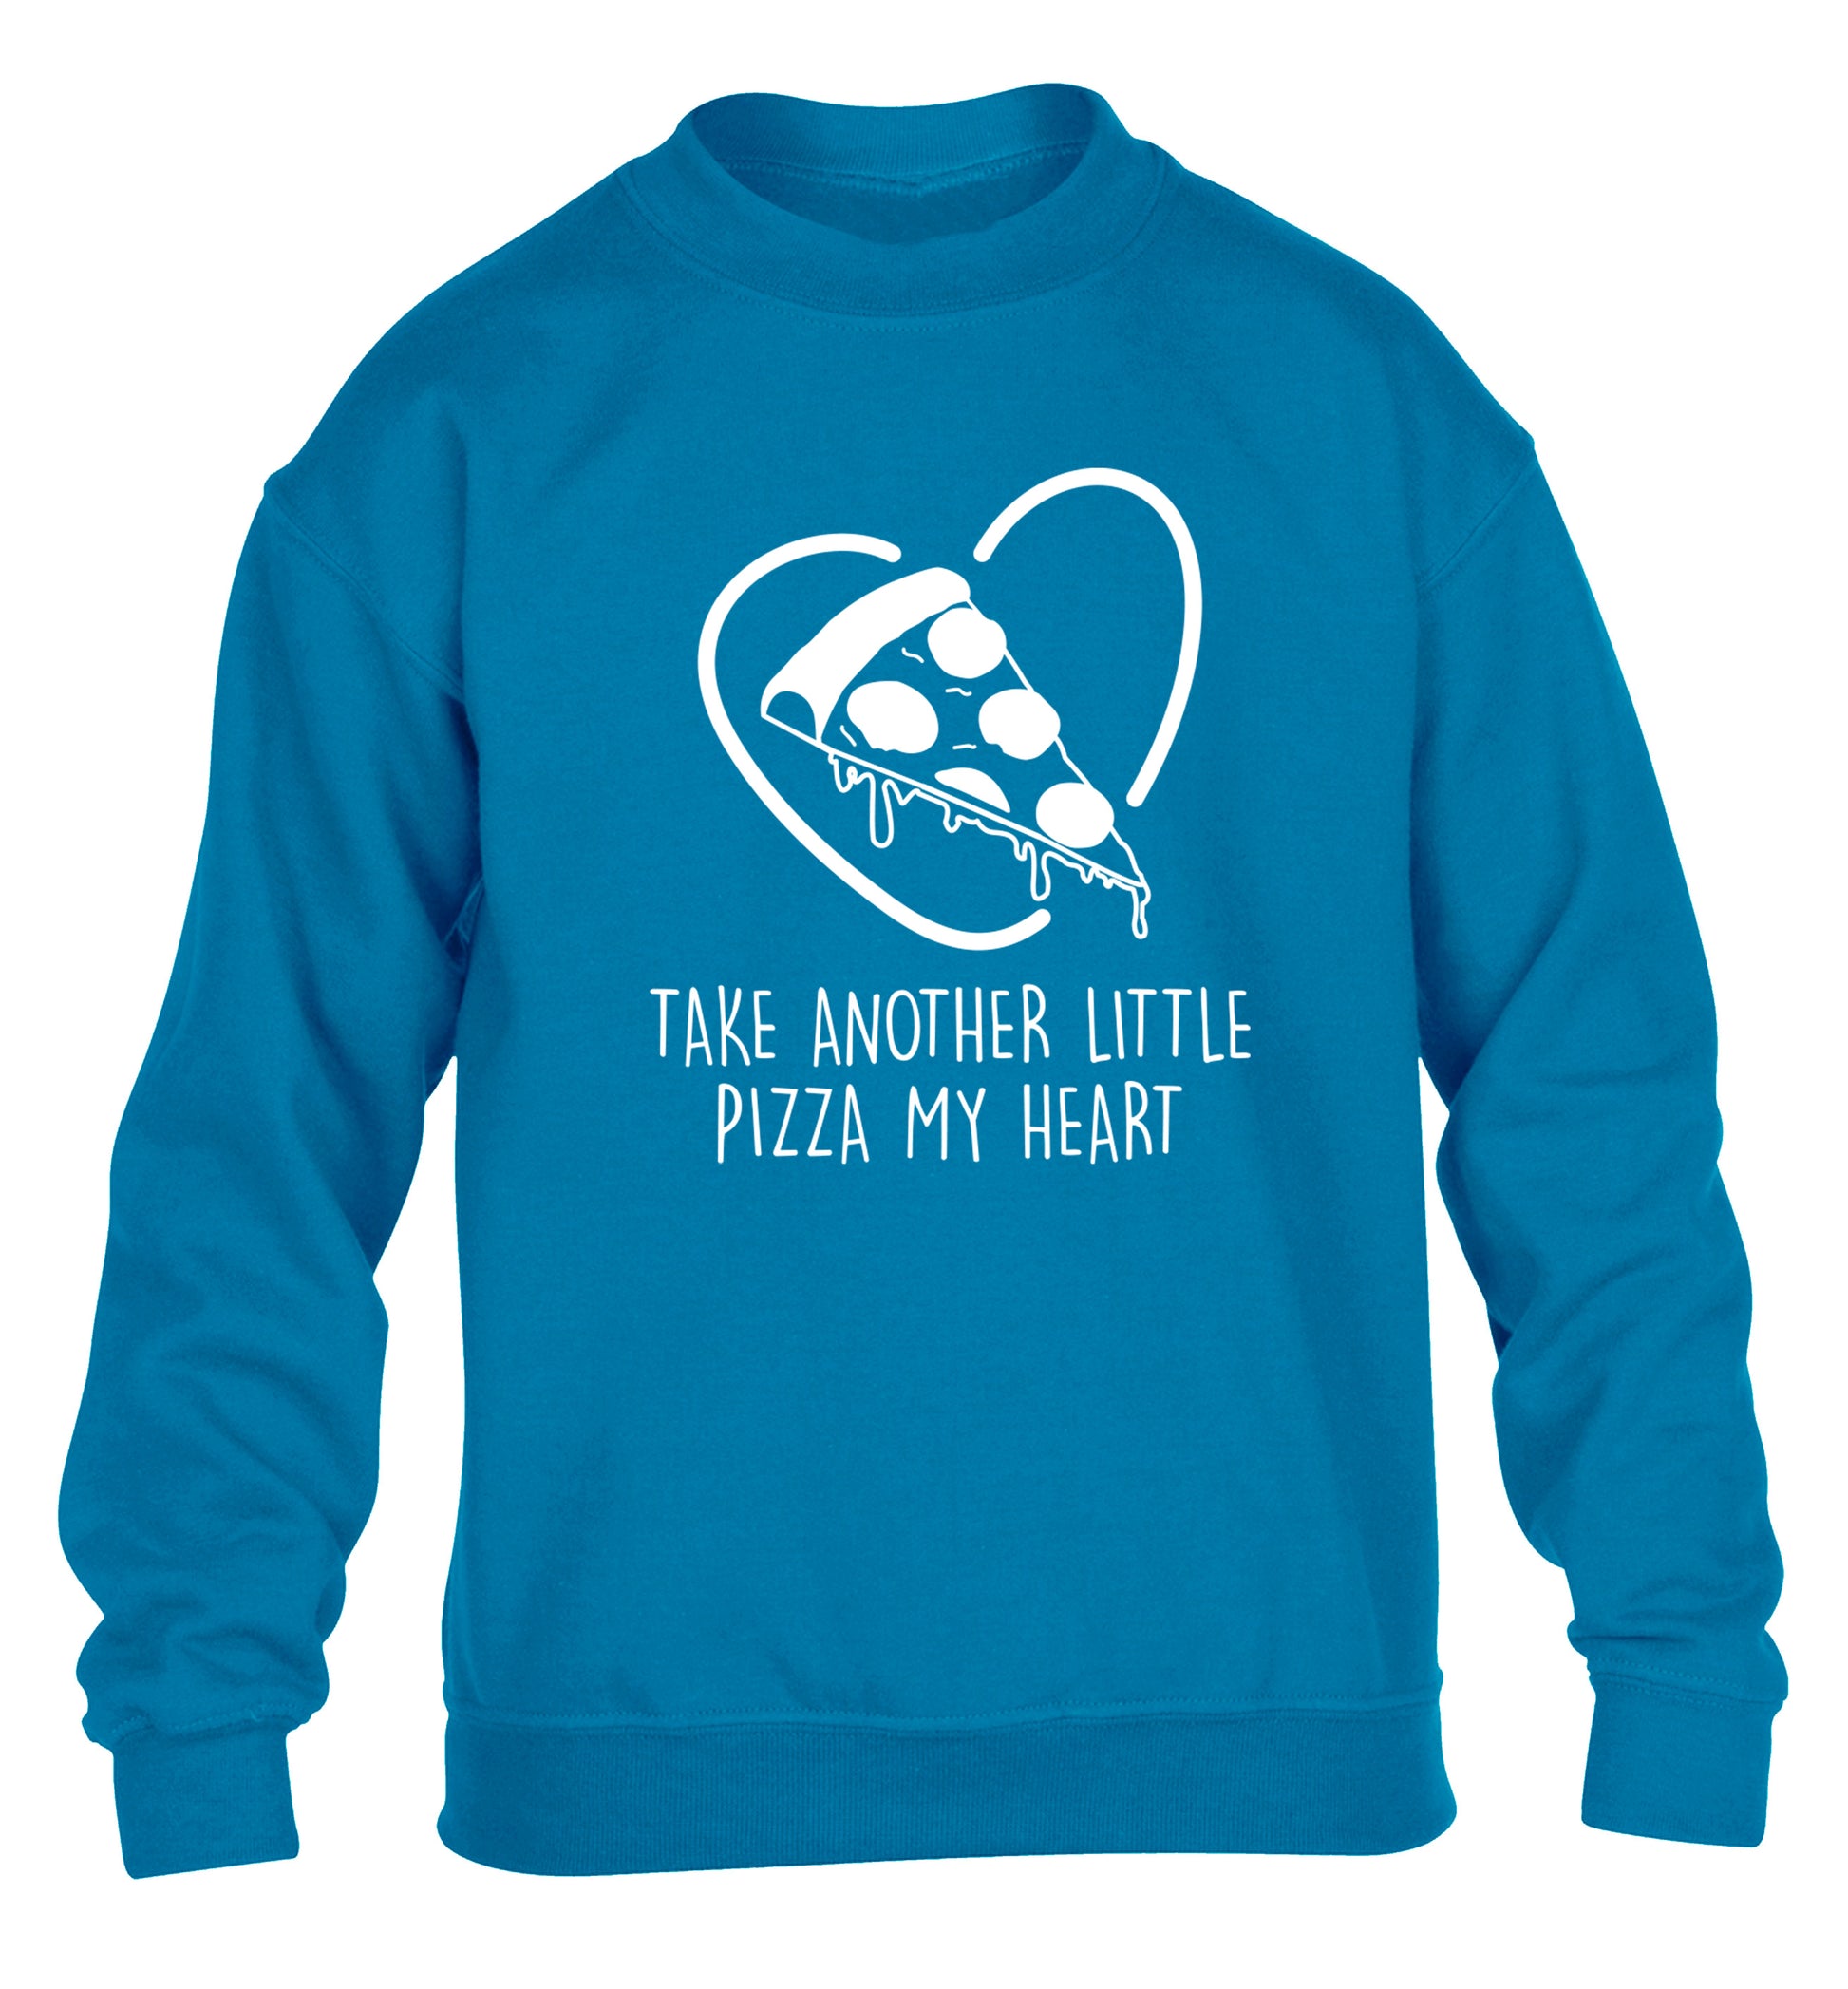 Take another little pizza my heart children's blue sweater 12-13 Years